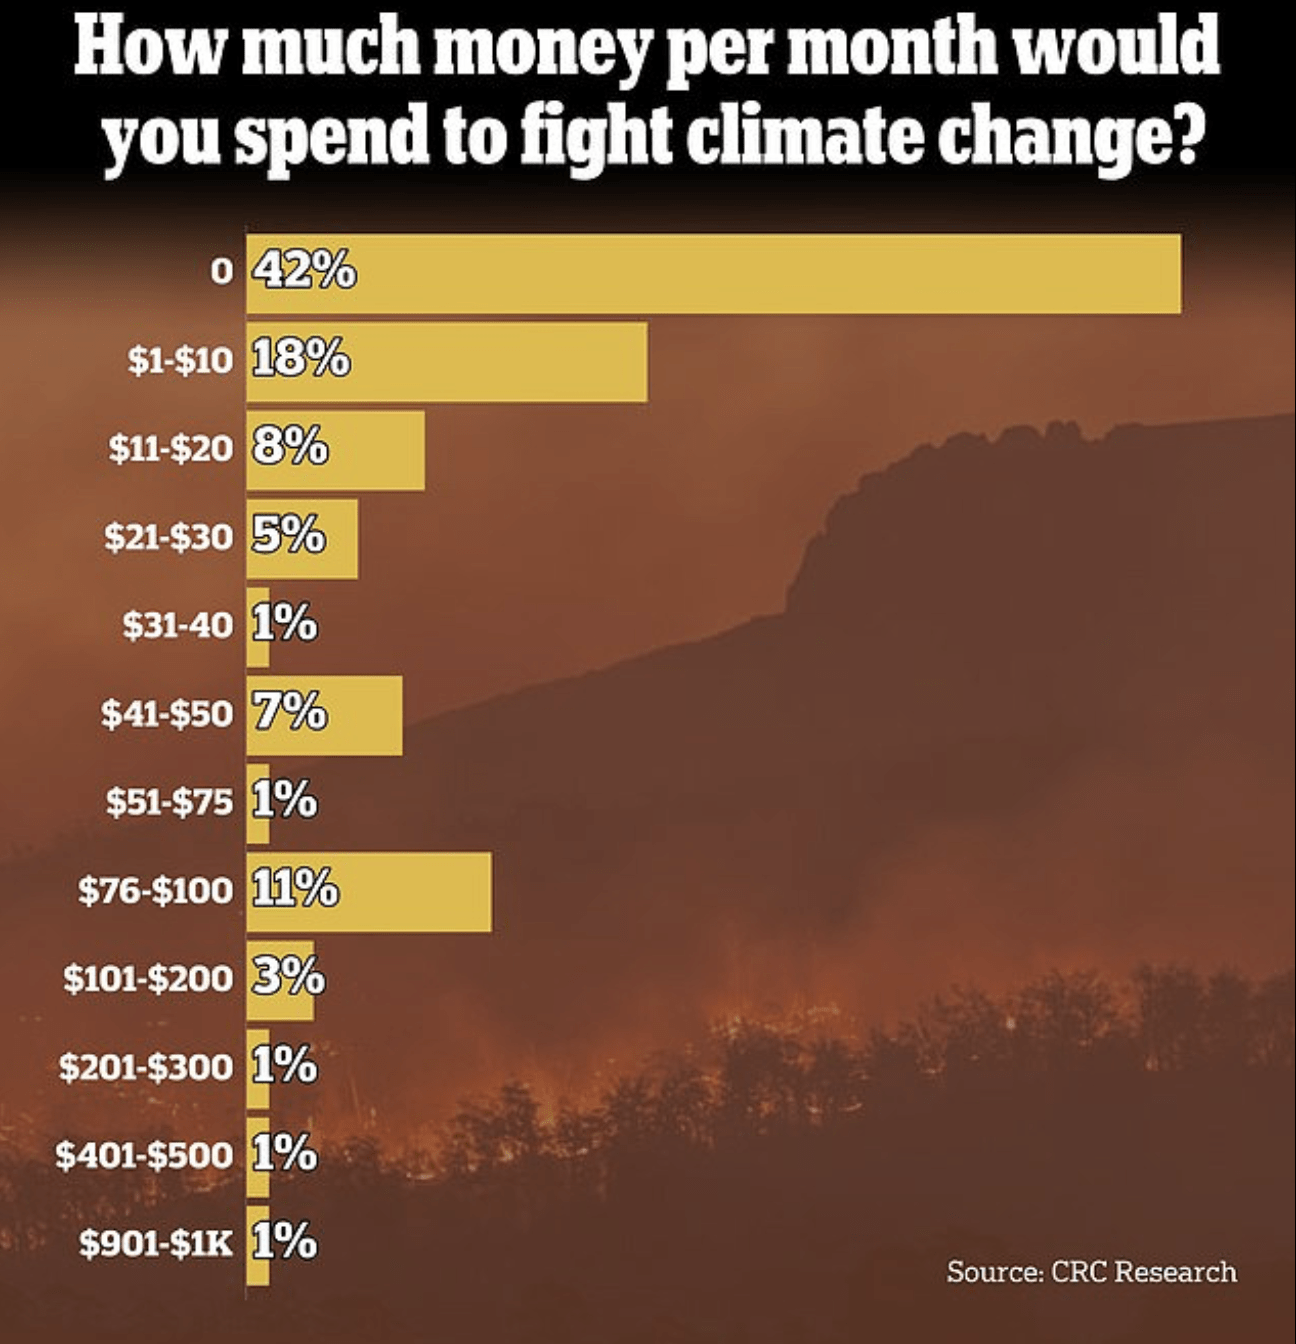 DAILY MAIL: Nearly half of all young voters won't pay more than $10 per month to fight climate change creating potential issue for President Biden campaigning on the 'existential threat'